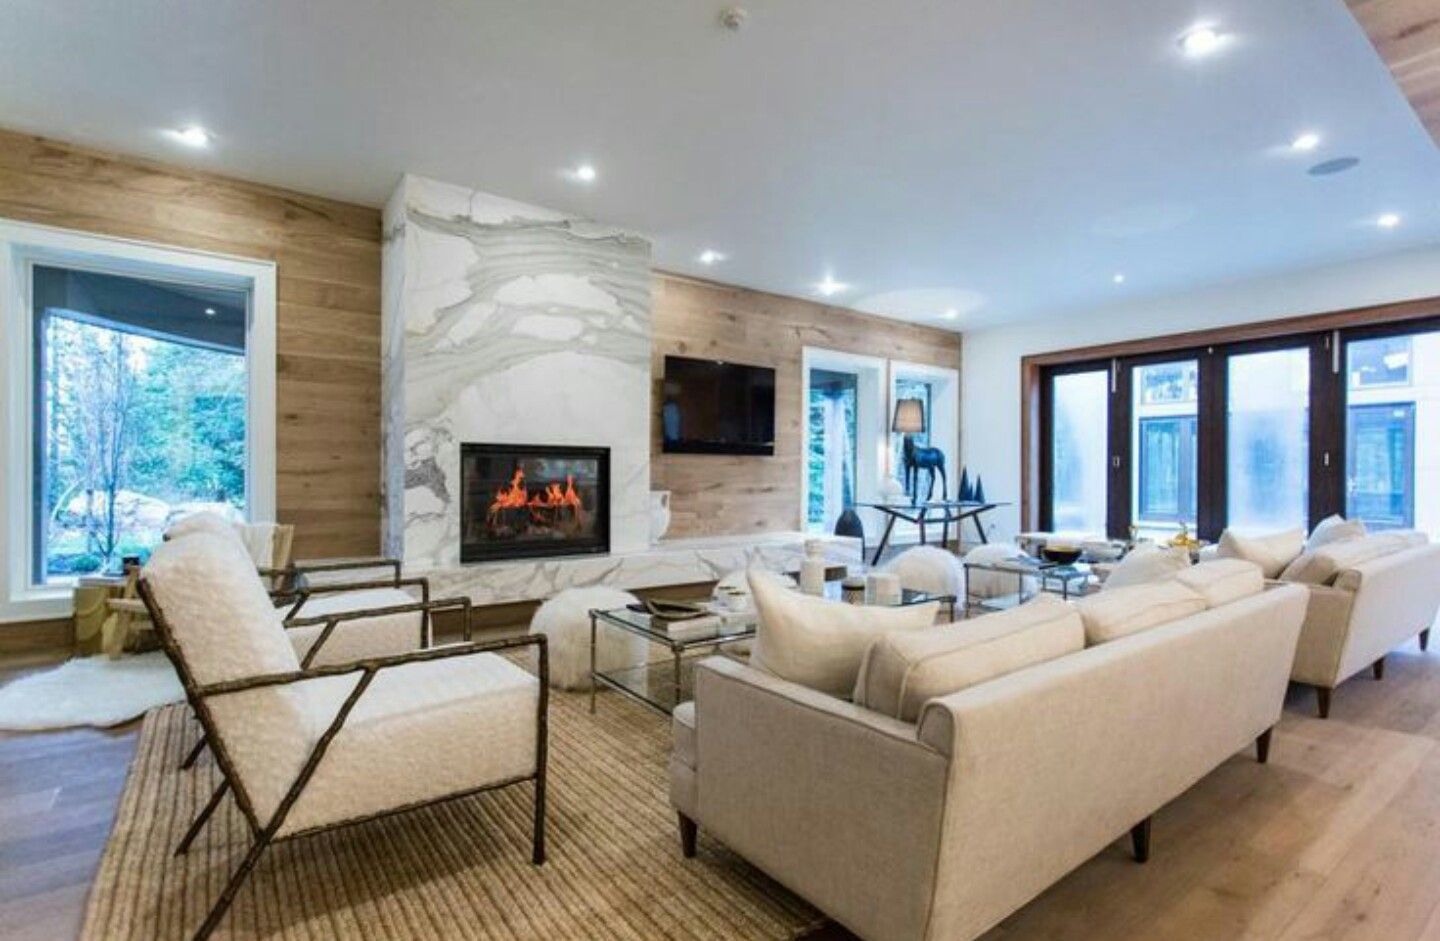 Tv Above Electric Fireplace Luxury 3 Noble Cool Tricks Fireplace with Tv Tile Fireplace